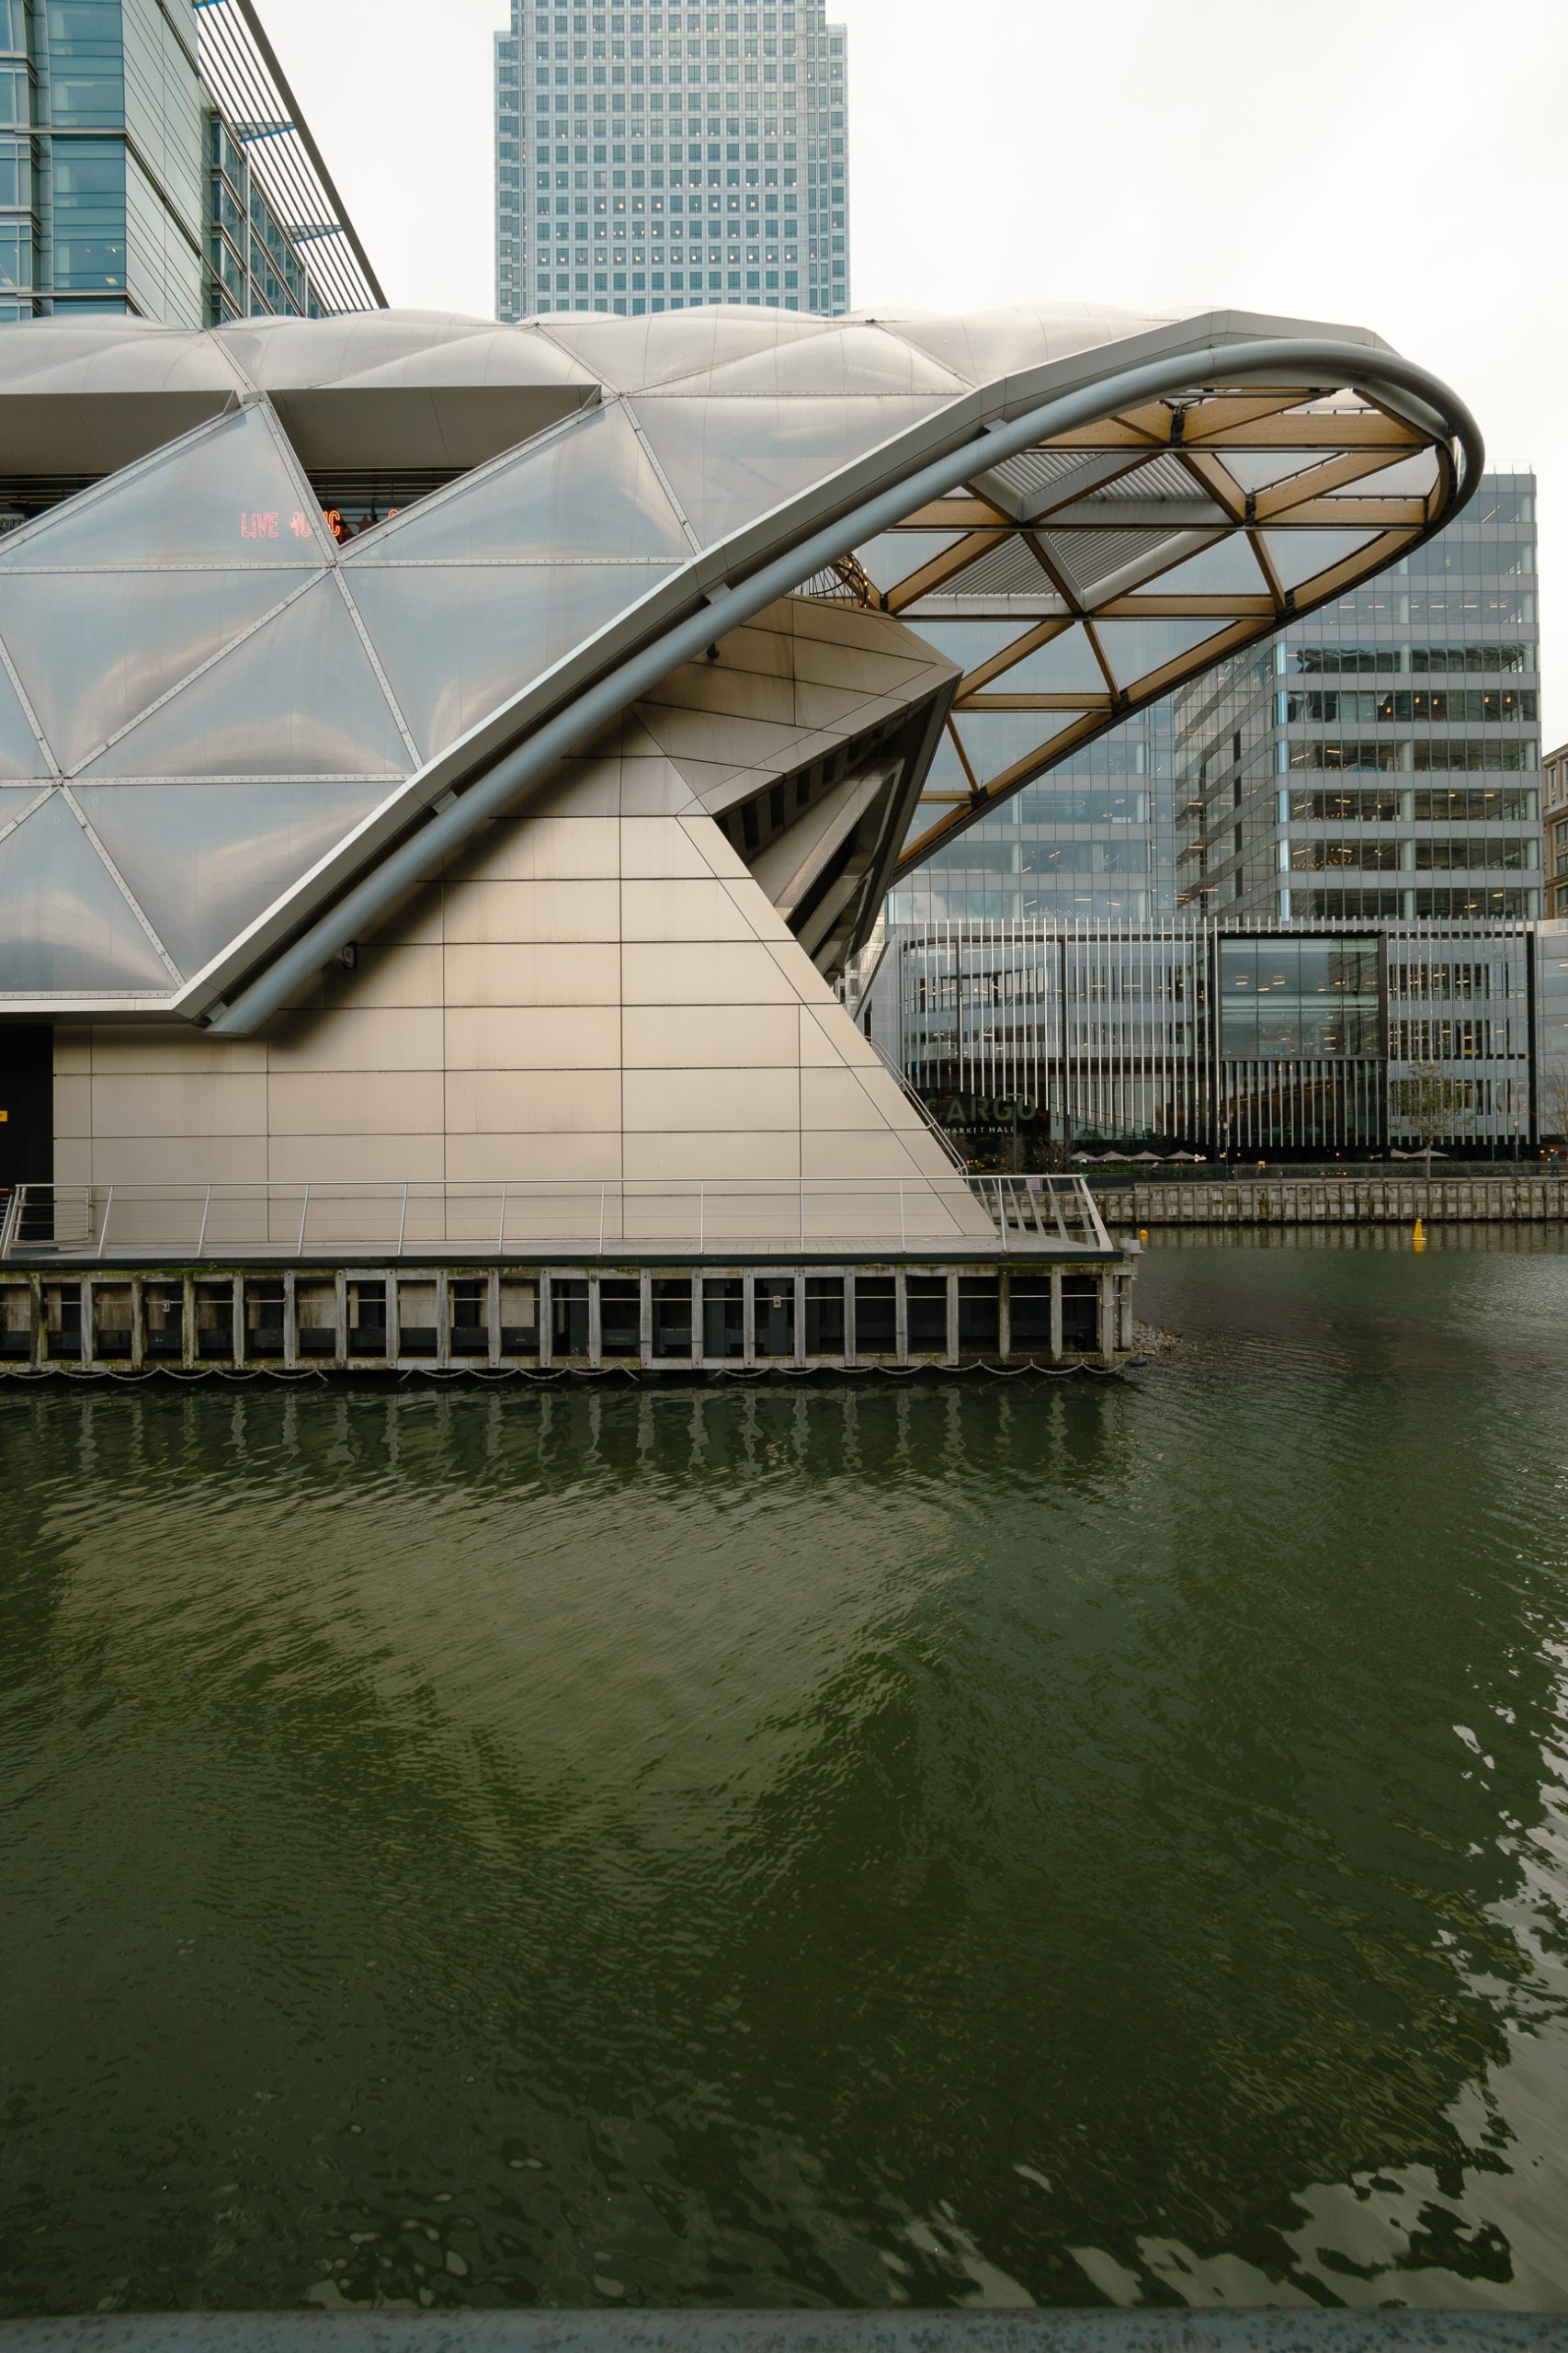 The Eastern end of the Elizabeth Line's Canary Wharf station viewed in profile. It resembles the prow of a large ship.